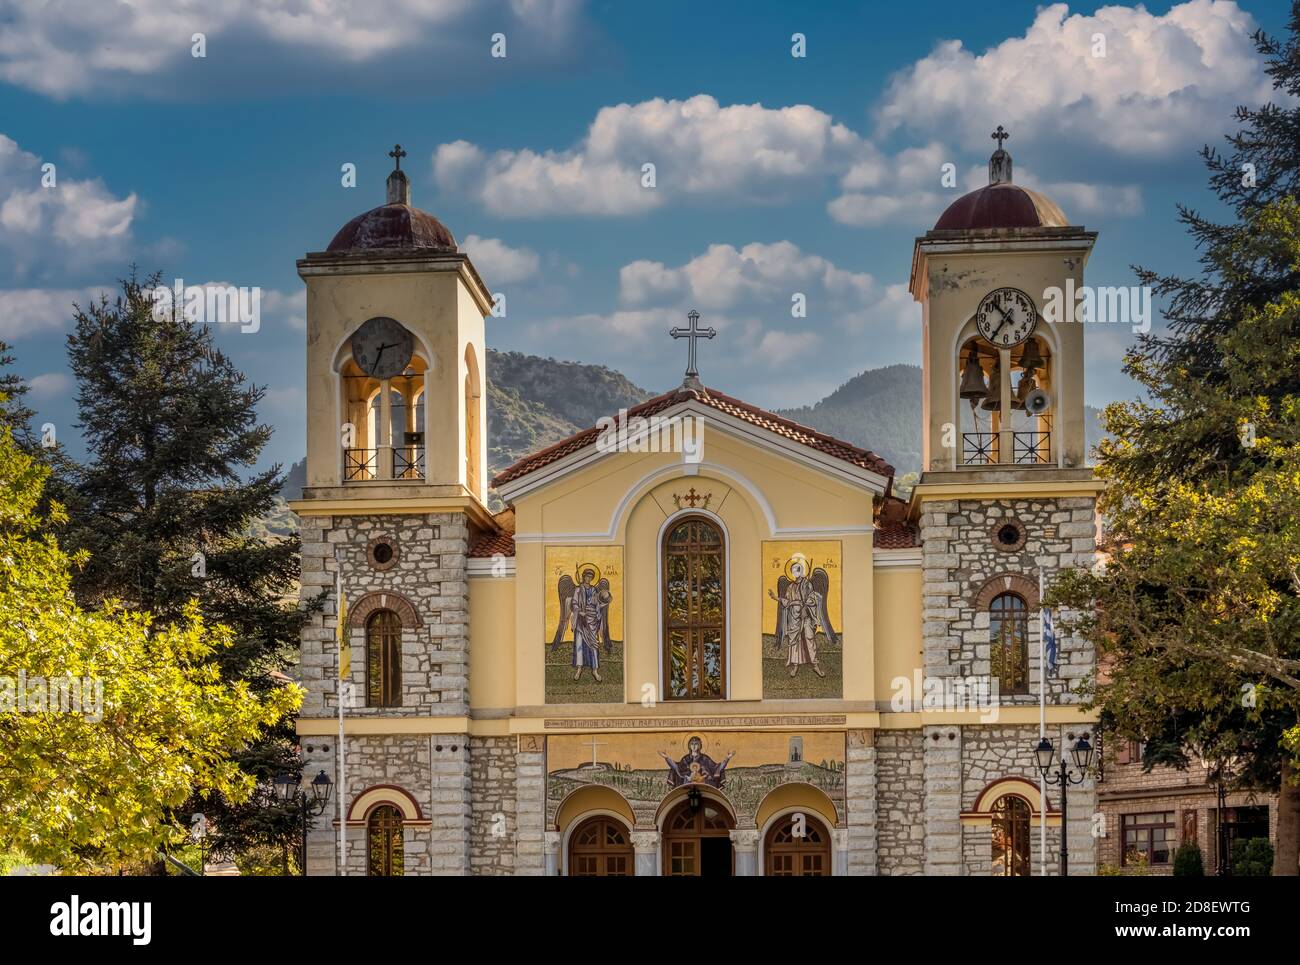 The Church of Dormition of the Virgin Mary, a Greek Orthodox Cathedral in Kalavryta, Peloponnese, Greece. Stock Photo